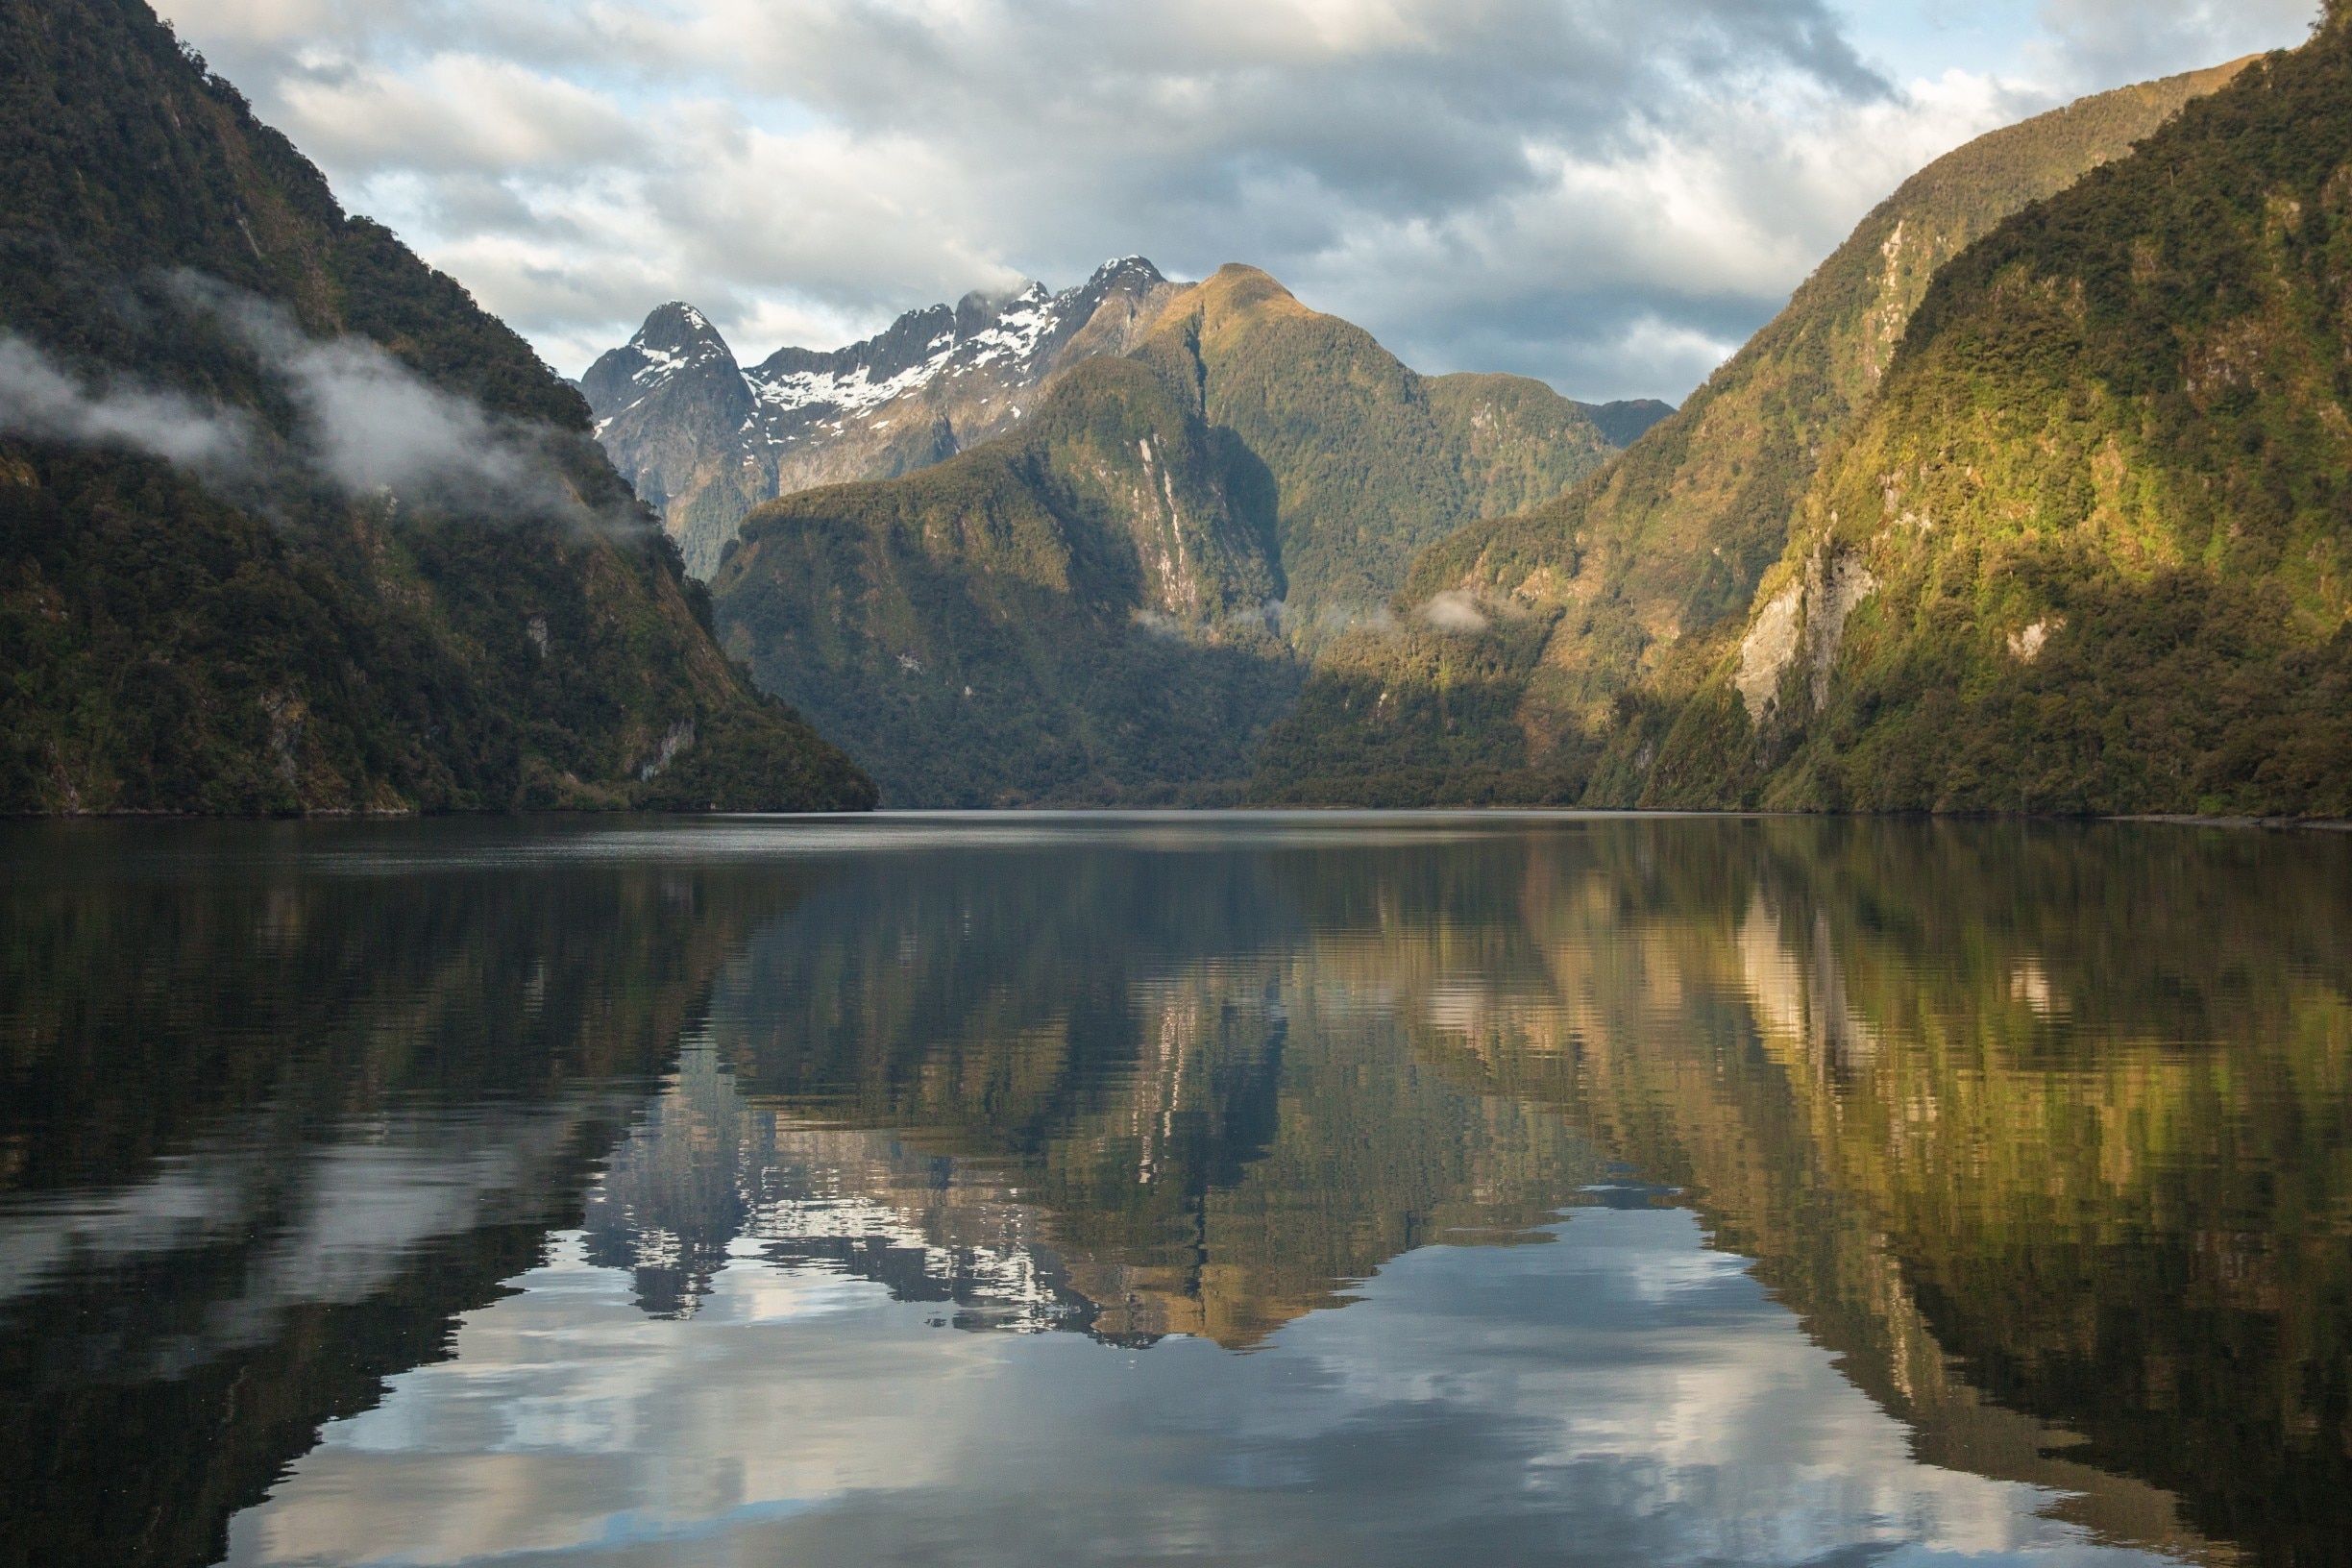 Doubtful Sound's overnight cruise with Real Journey's is a must-do in Fiordland if you are hoping for an off the beaten path experience